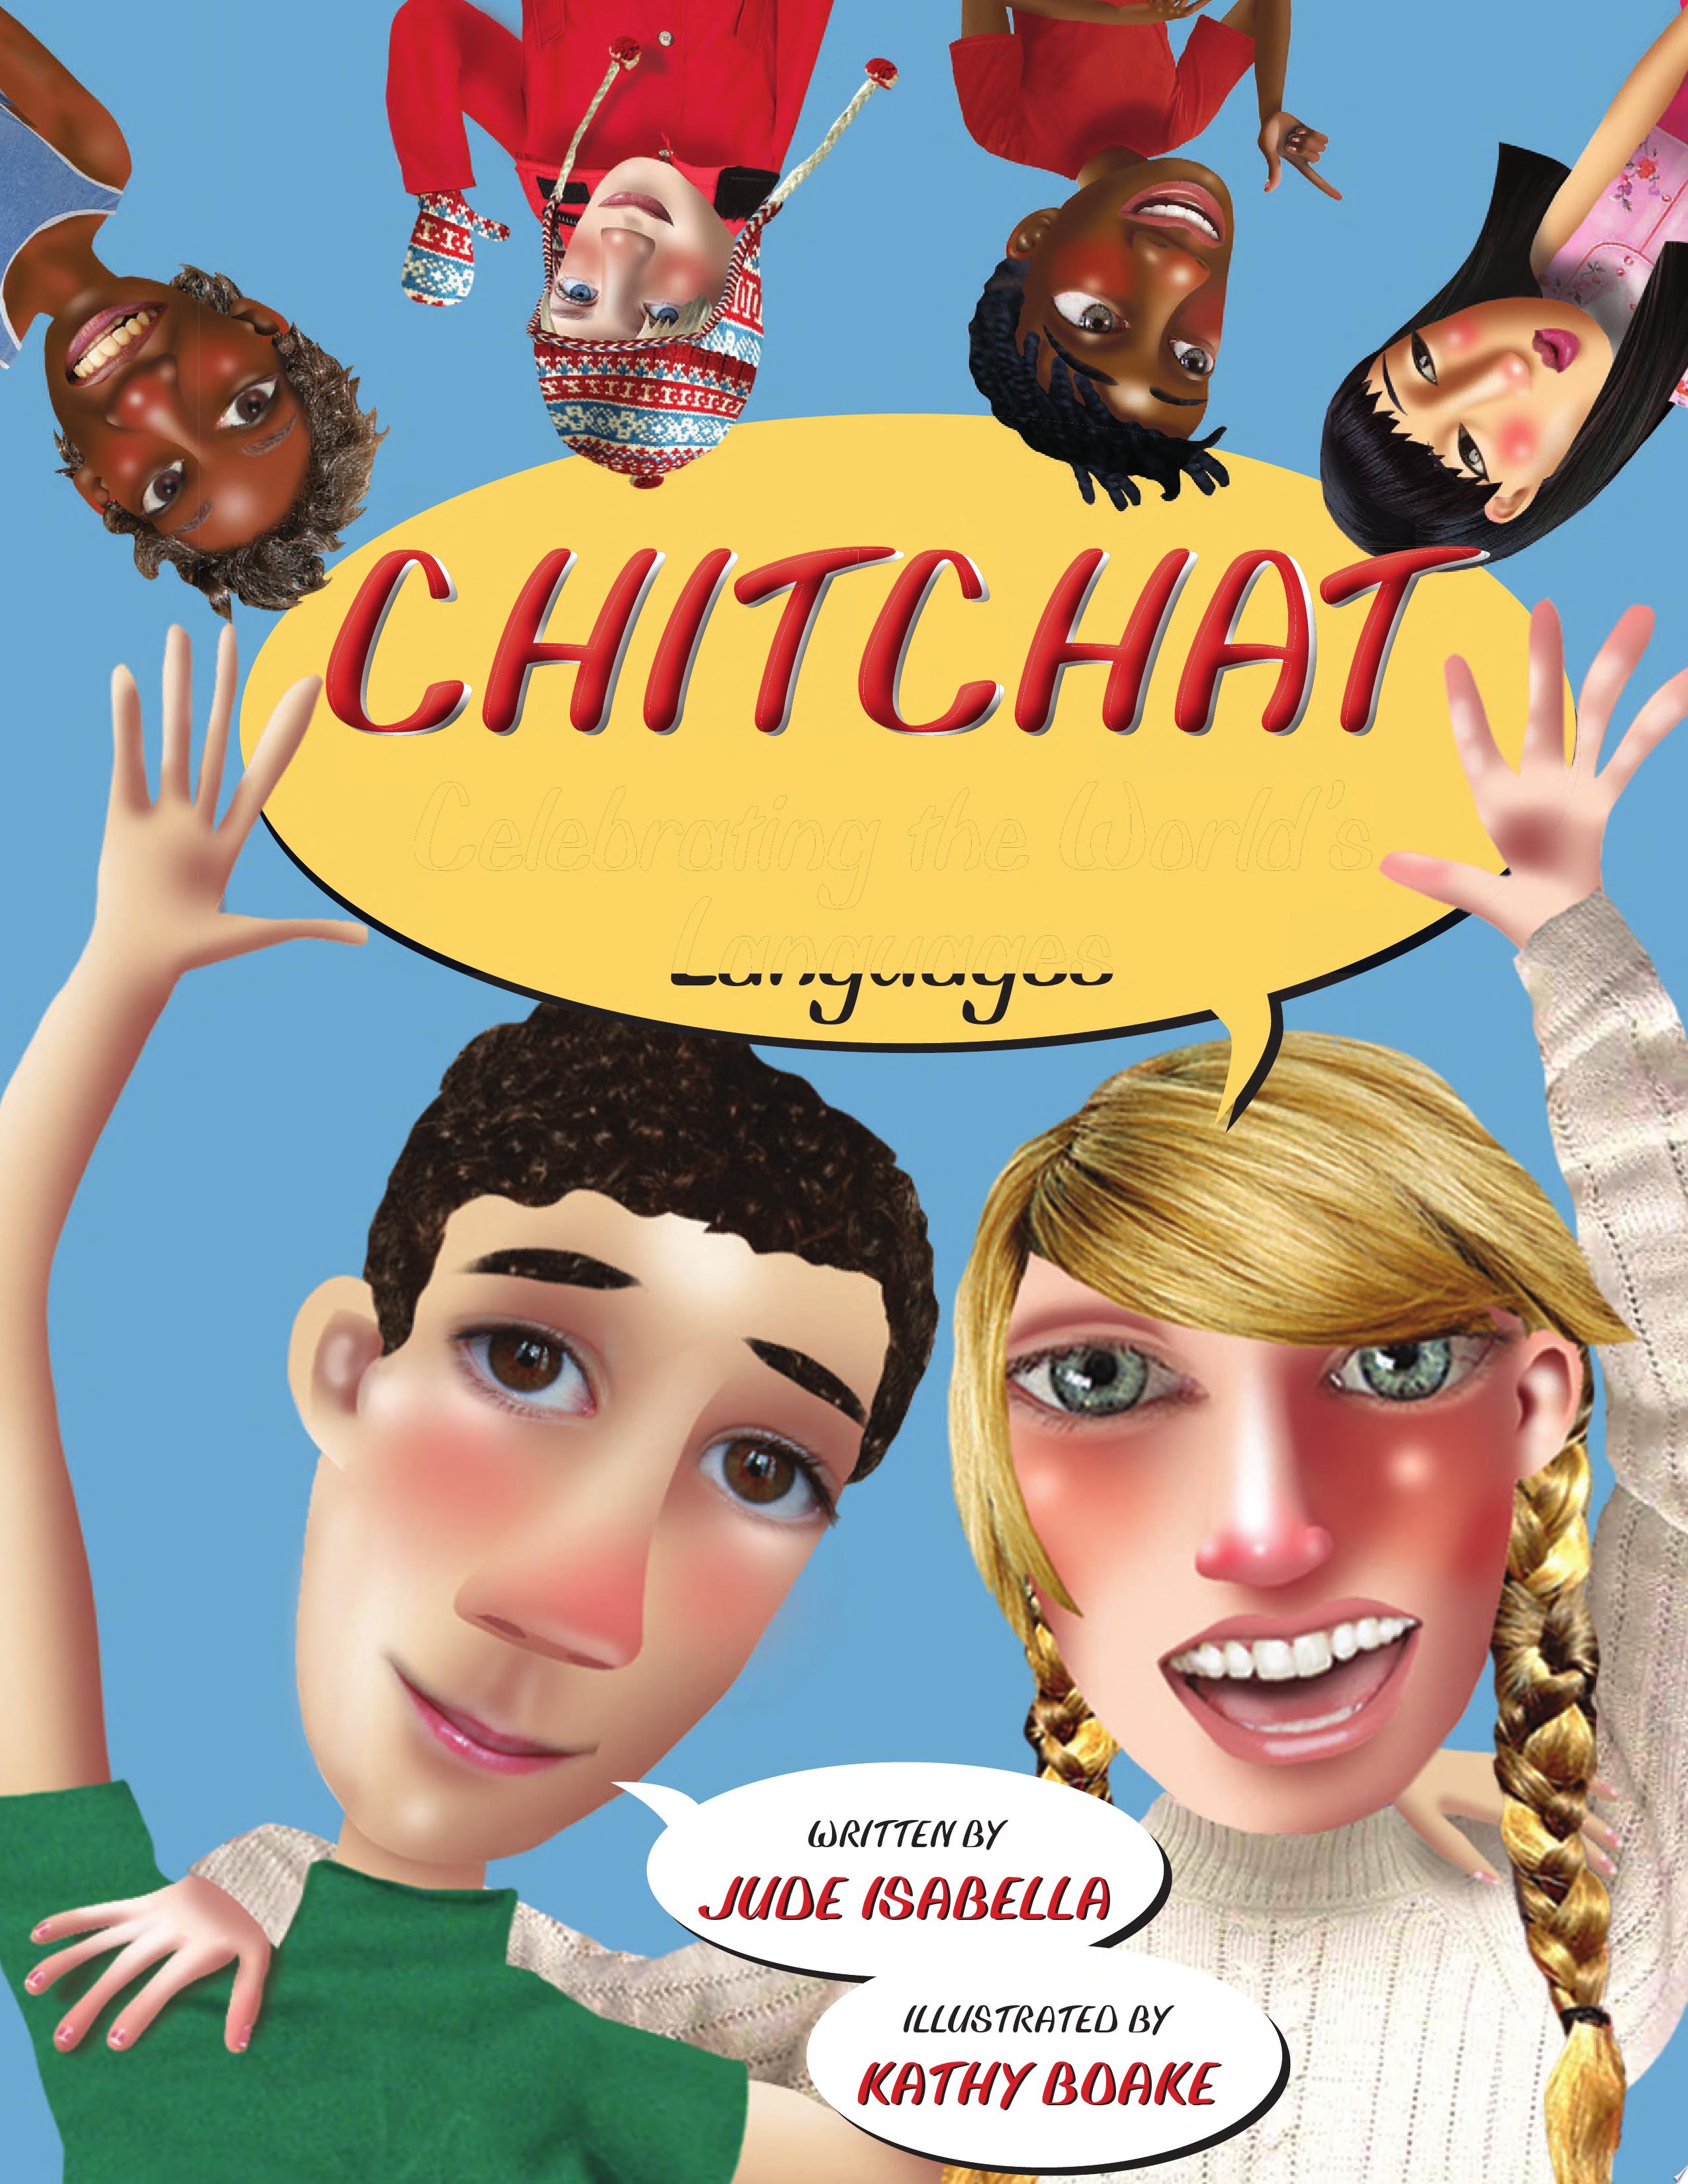 Image for "Chitchat"